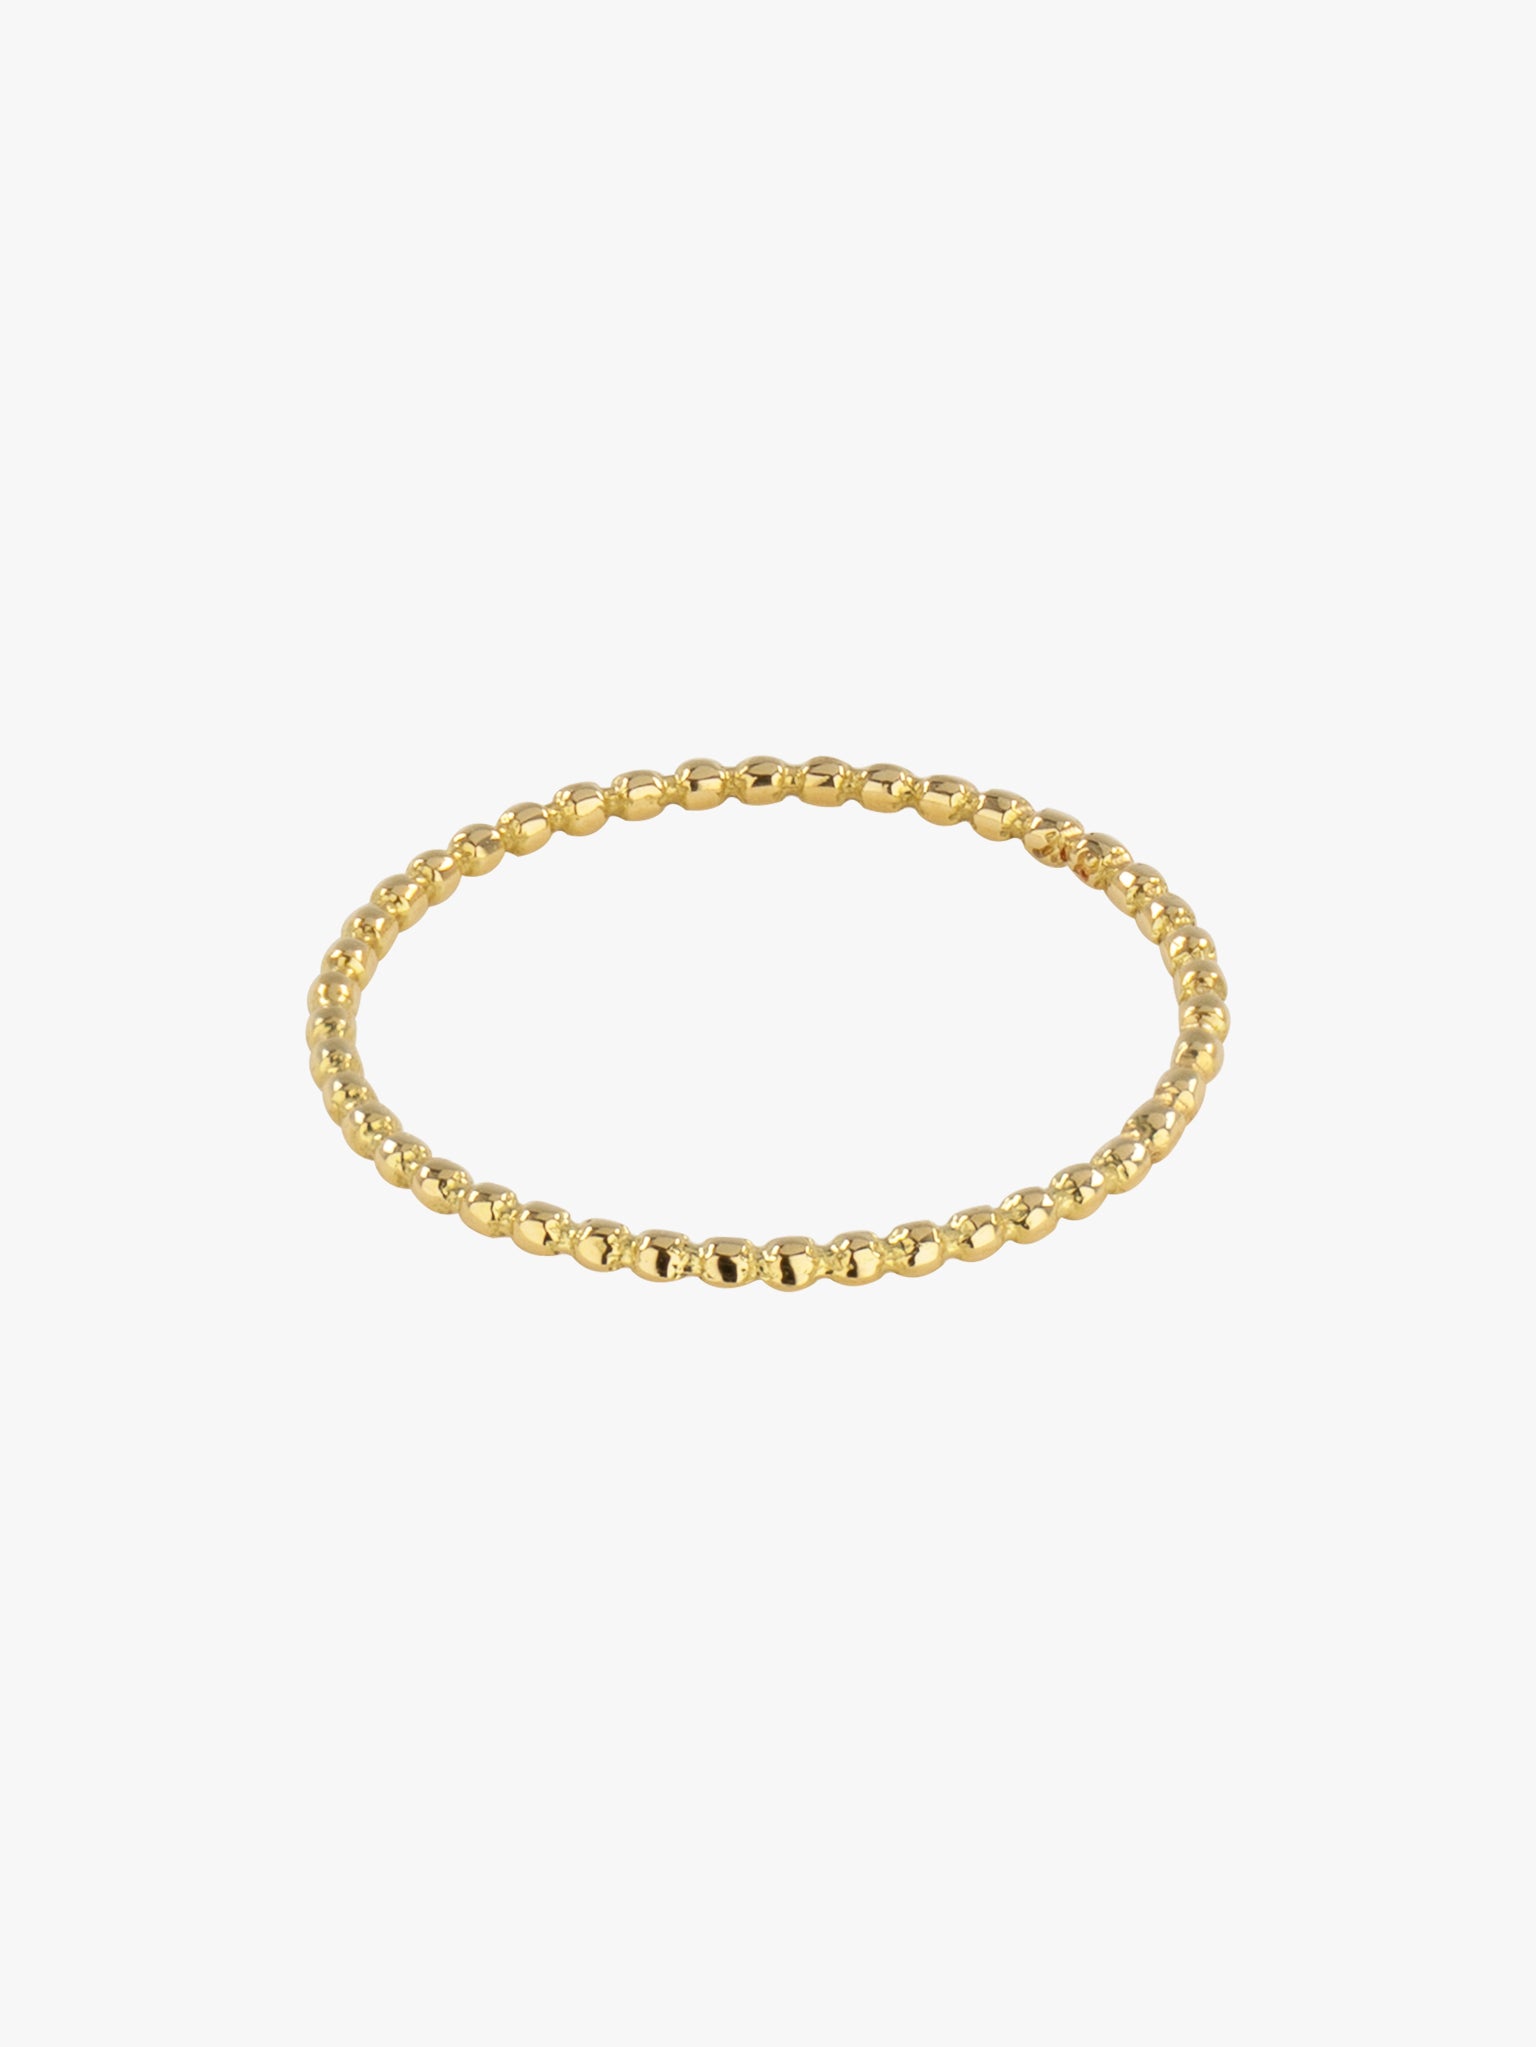 Beaded gold band